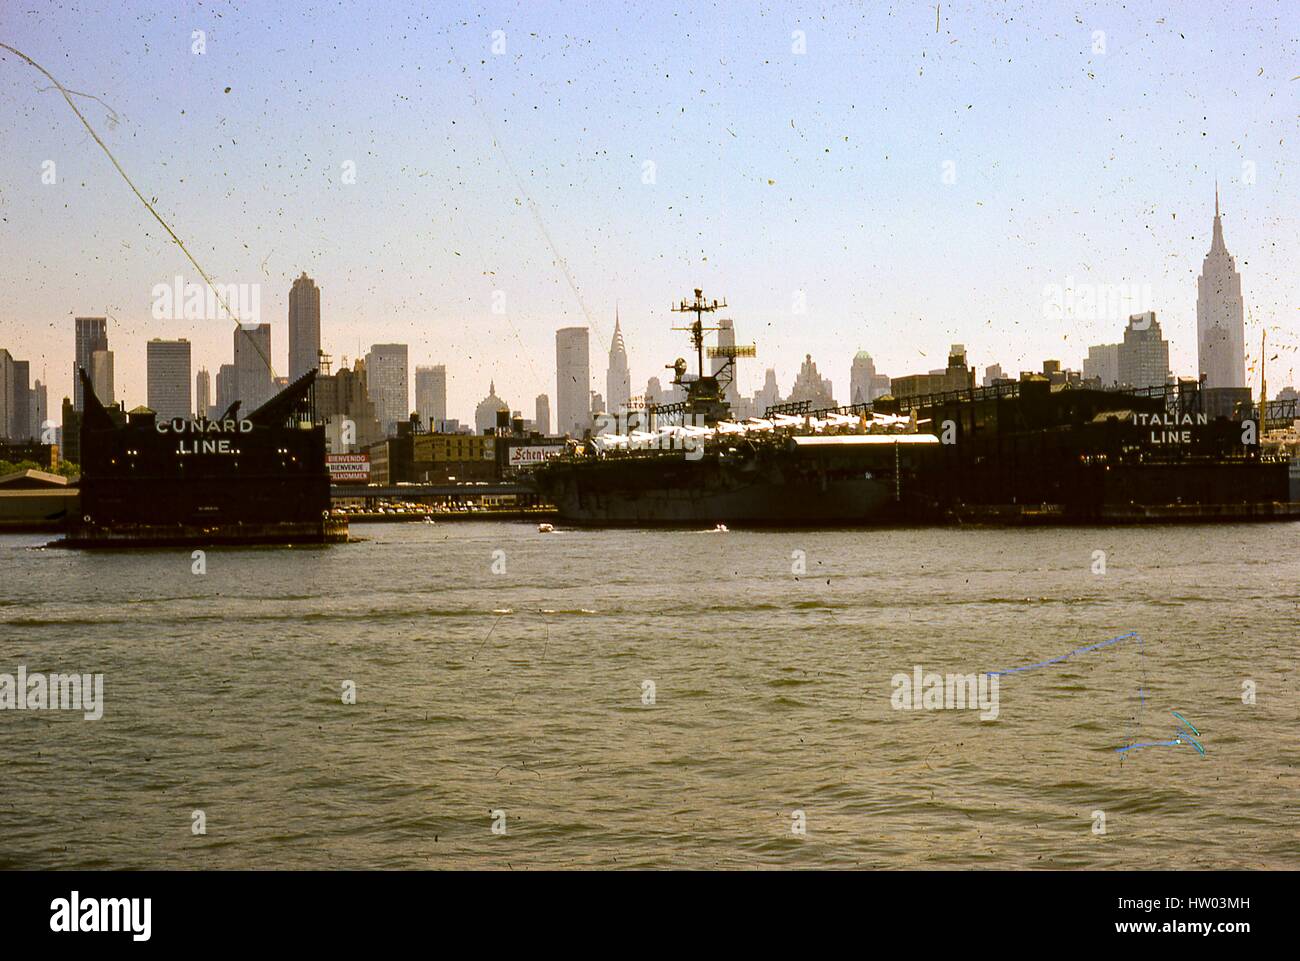 View from the Hudson River of the Cunard Line and Italian Line piers at the New York City Passenger Ship Terminal, known as Luxury Liner Row, in the Hells Kitchen neighborhood on the west side of Manhattan, New York City, New York, August, 1966. Visible in the foreground is a cruise ship docked at Italia's Pier 88, while Cunard is empty at 50th Street's Pier 90. Landmark skyscrapers seen in the background include the GE Building at Rockefeller Center, the Pan Am Building, the Chrysler Building, and the Empire State Building. Stock Photo